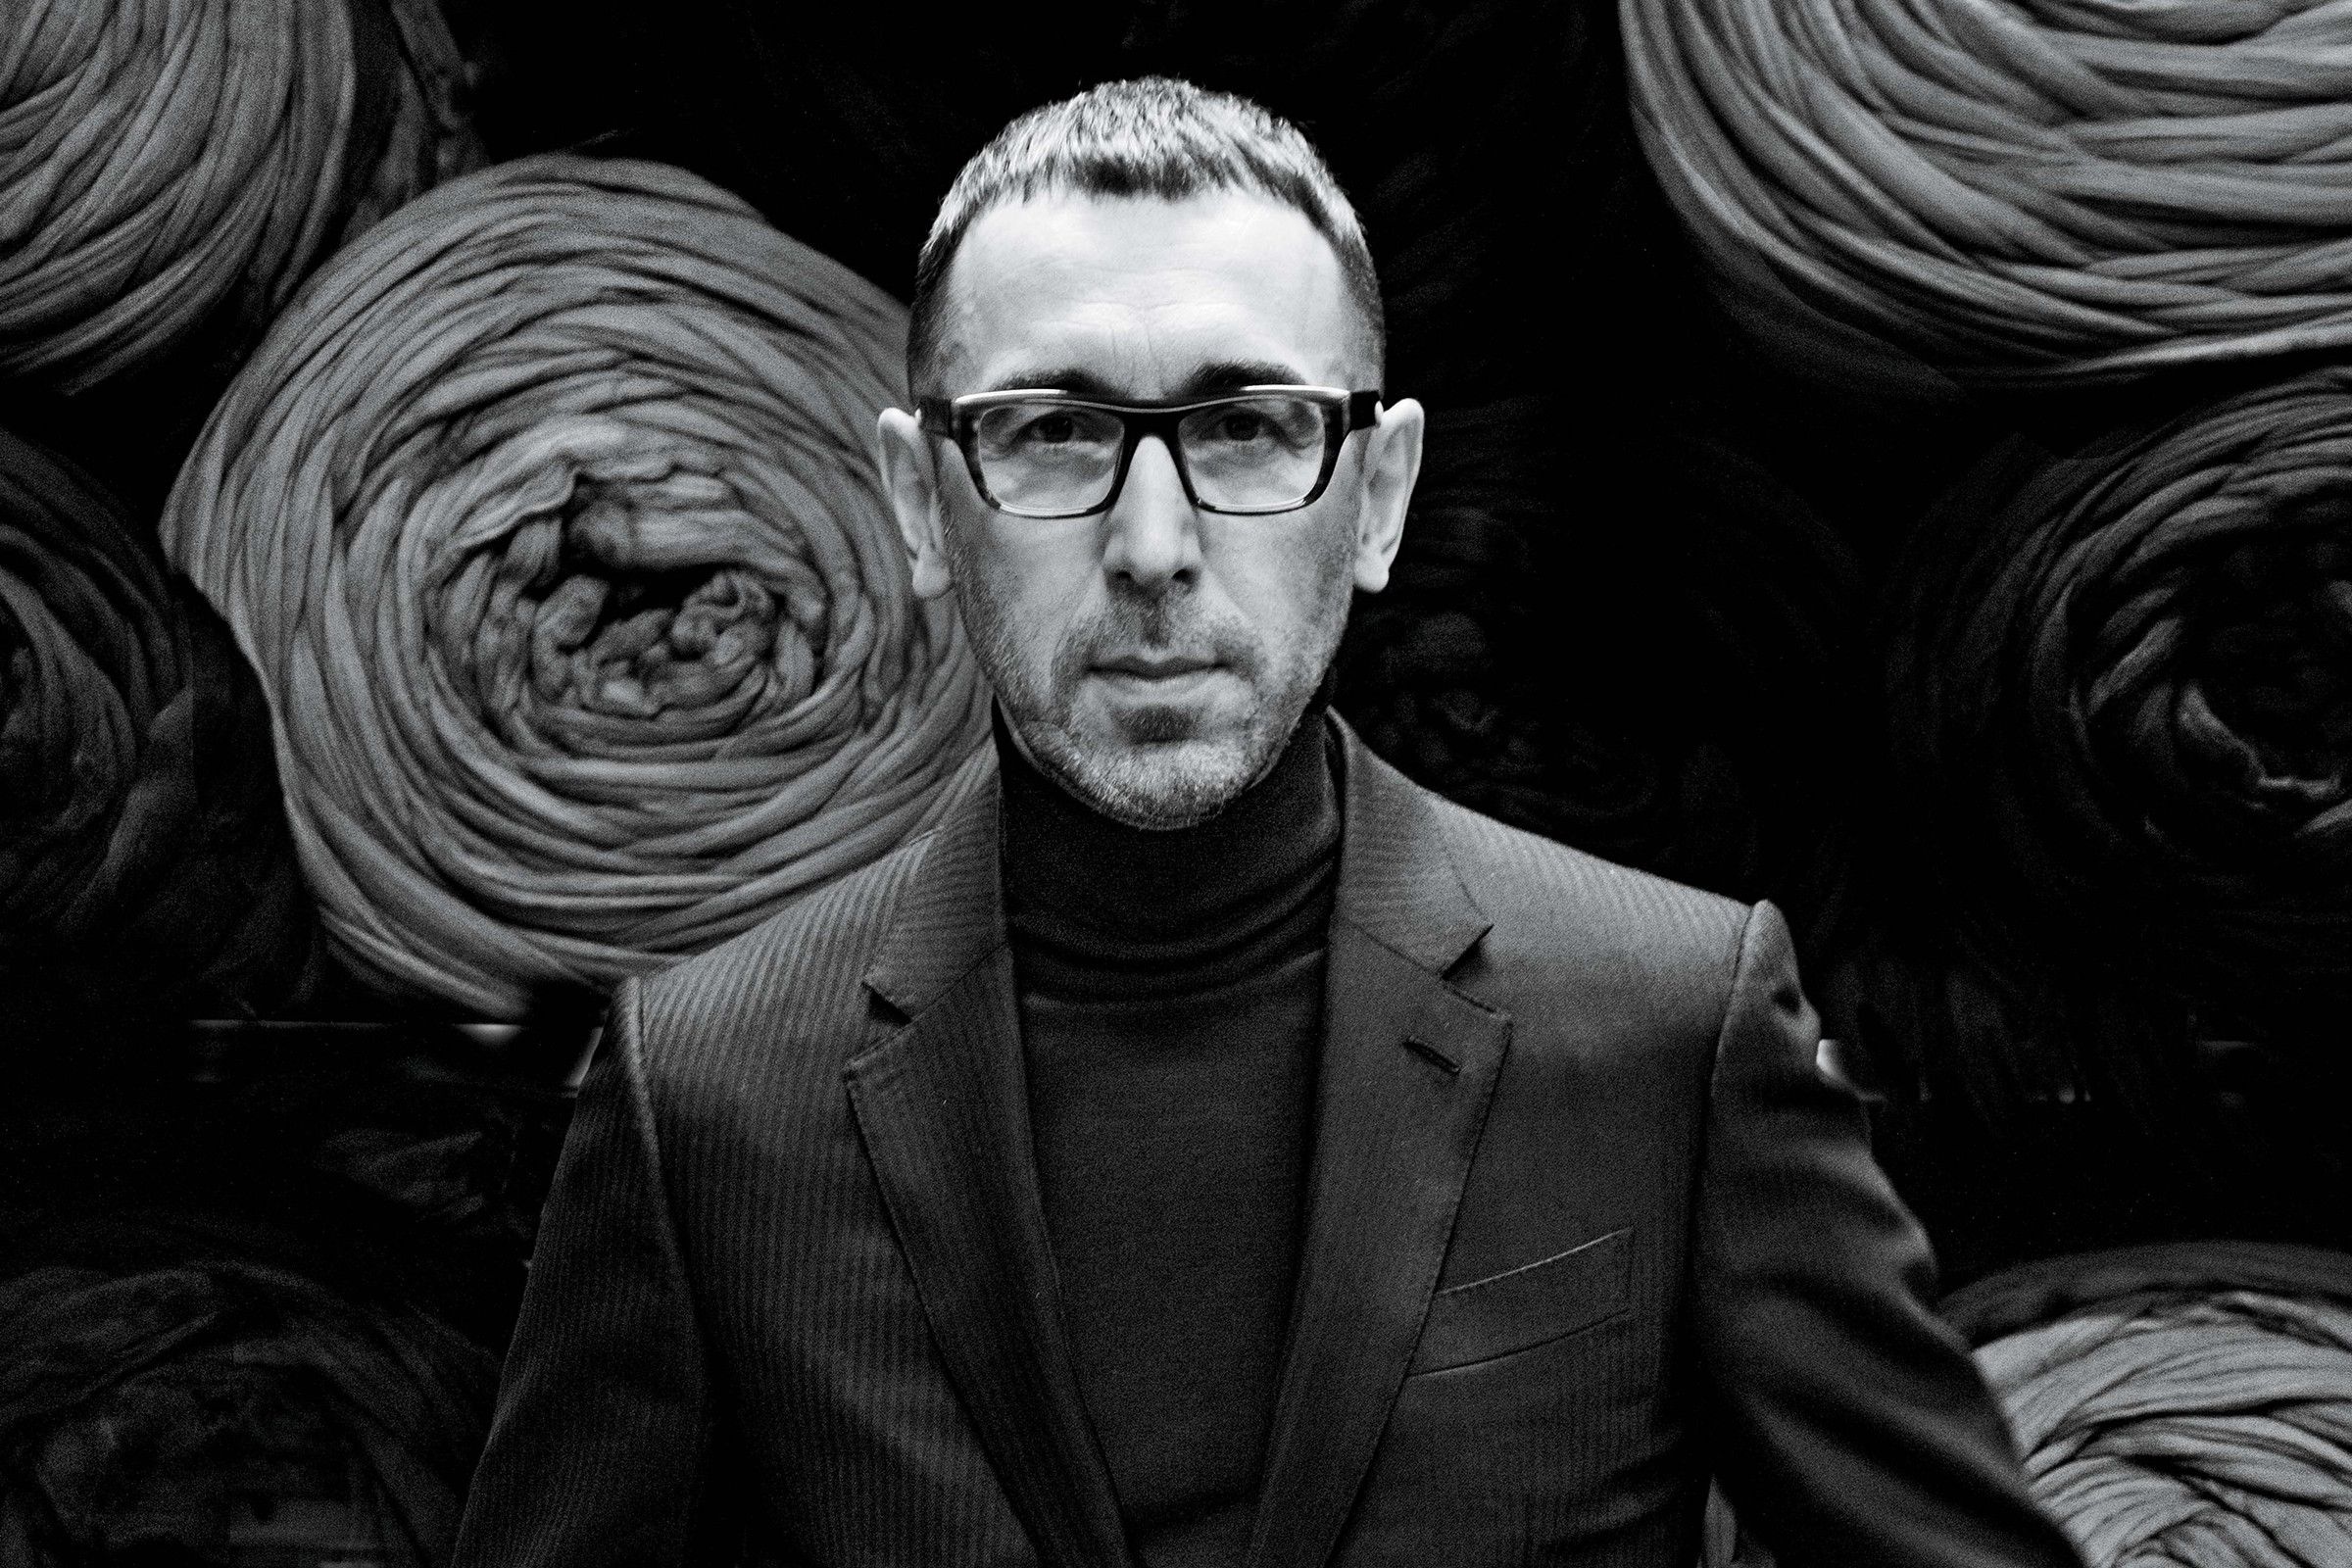 From A to Z Zegna: The Tale of Alessandro Sartori | Grailed